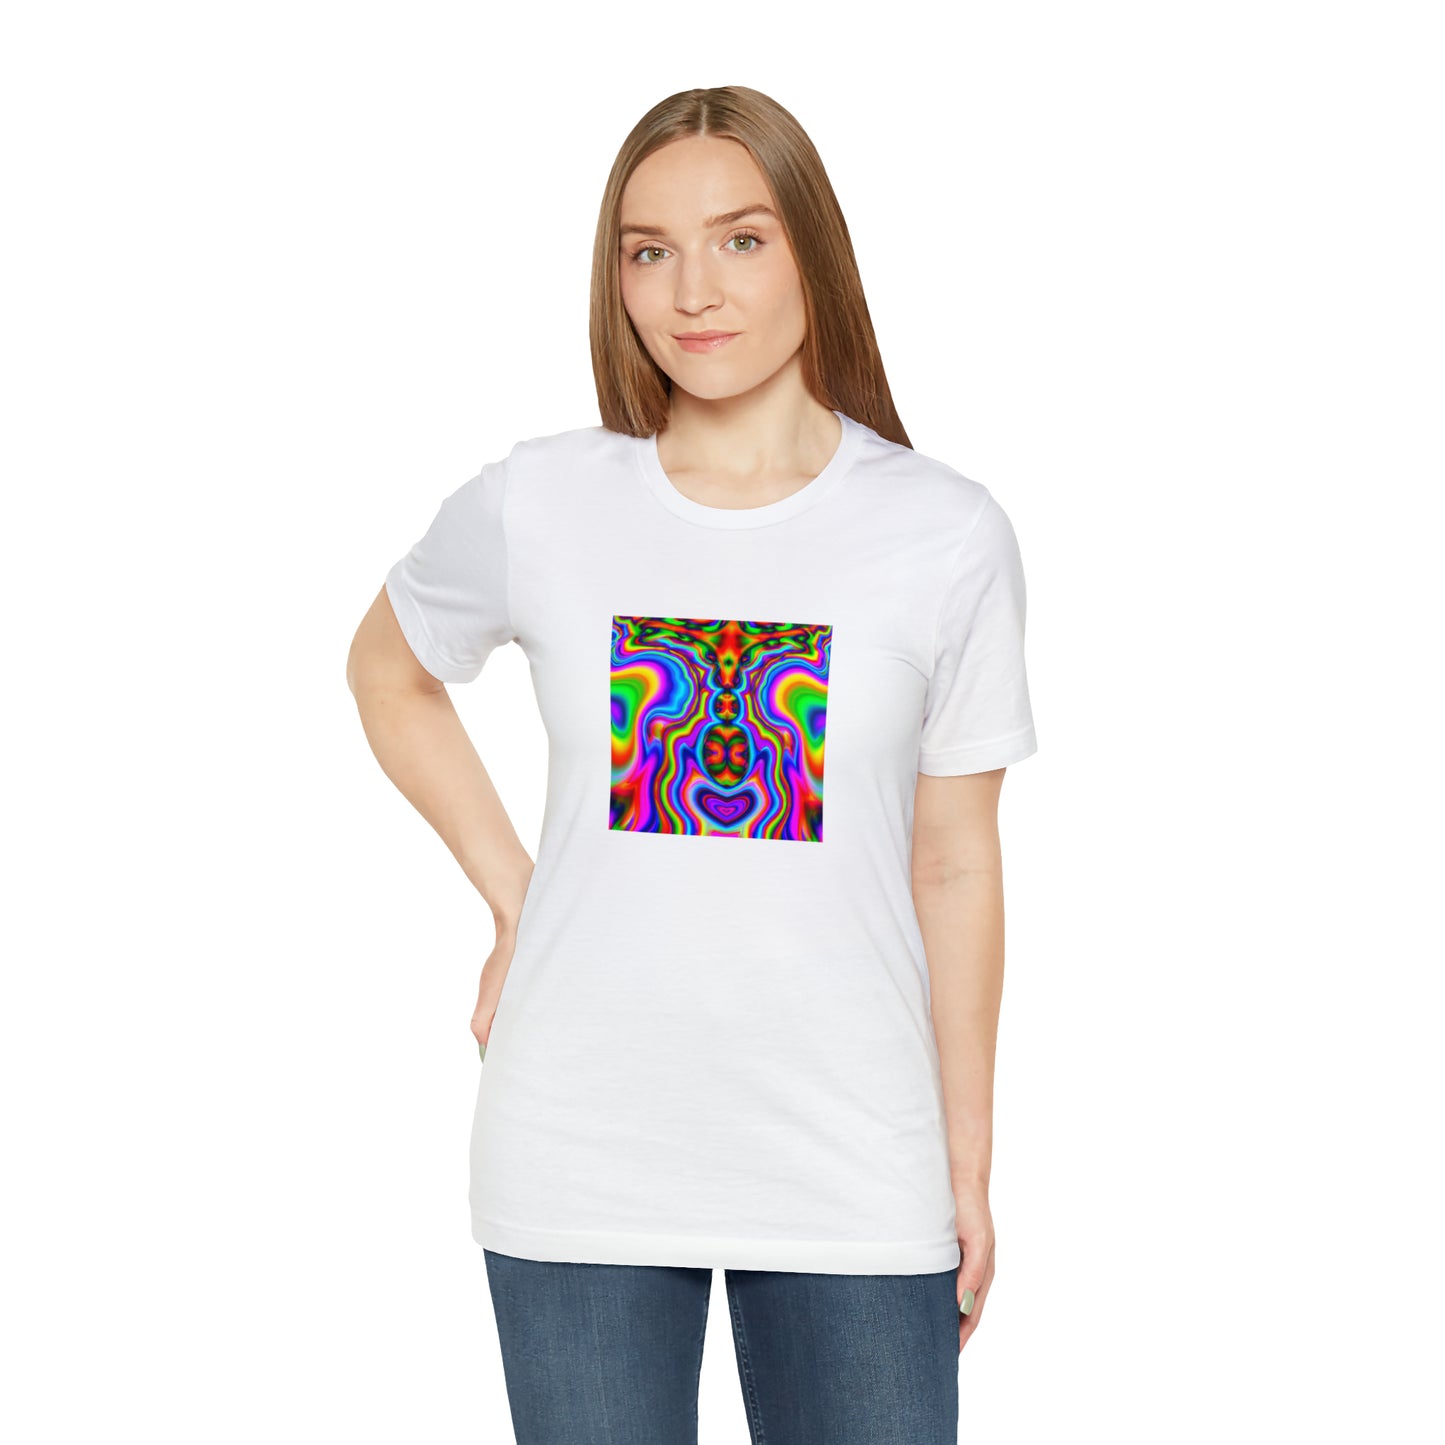 Harold Gibson. - Psychedelic Trippy Pattern Tee Shirt